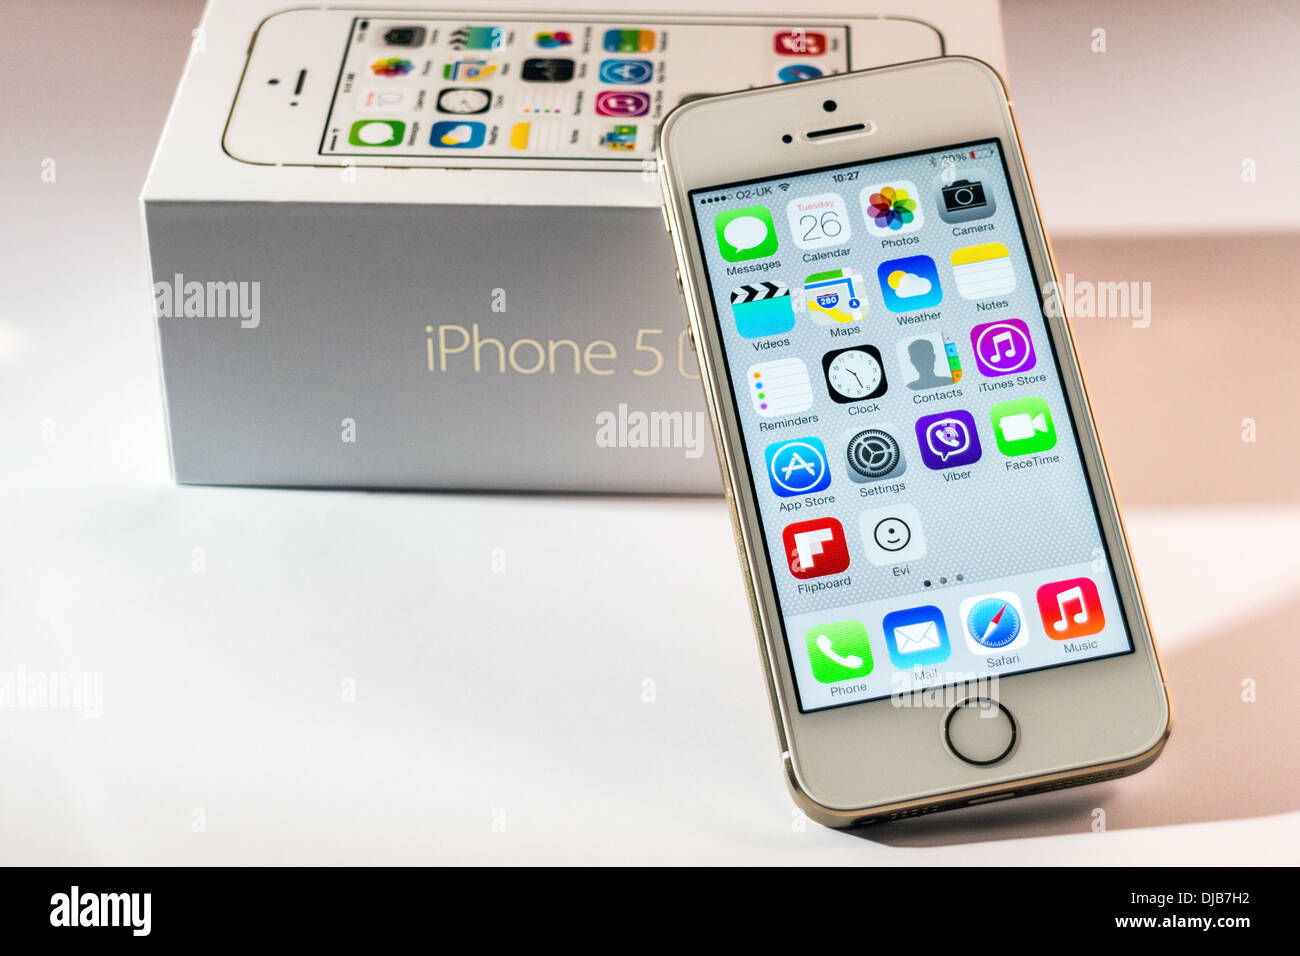 Iphone 5s Gold Front View Slanted On Box Stock Photo 62942350 Alamy